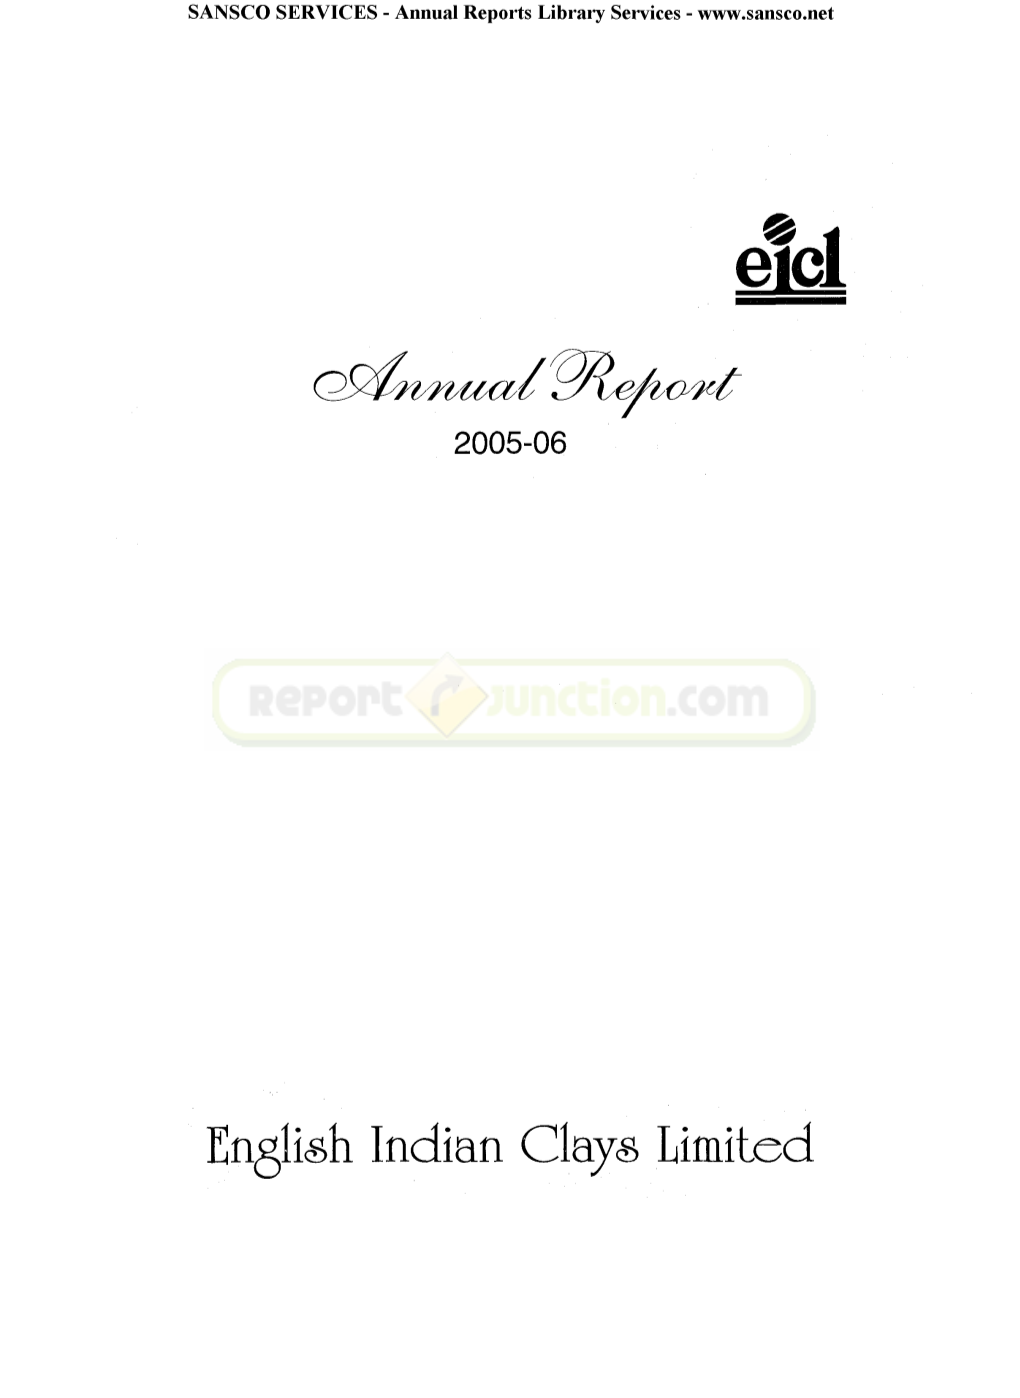 English Indian Clays Limited